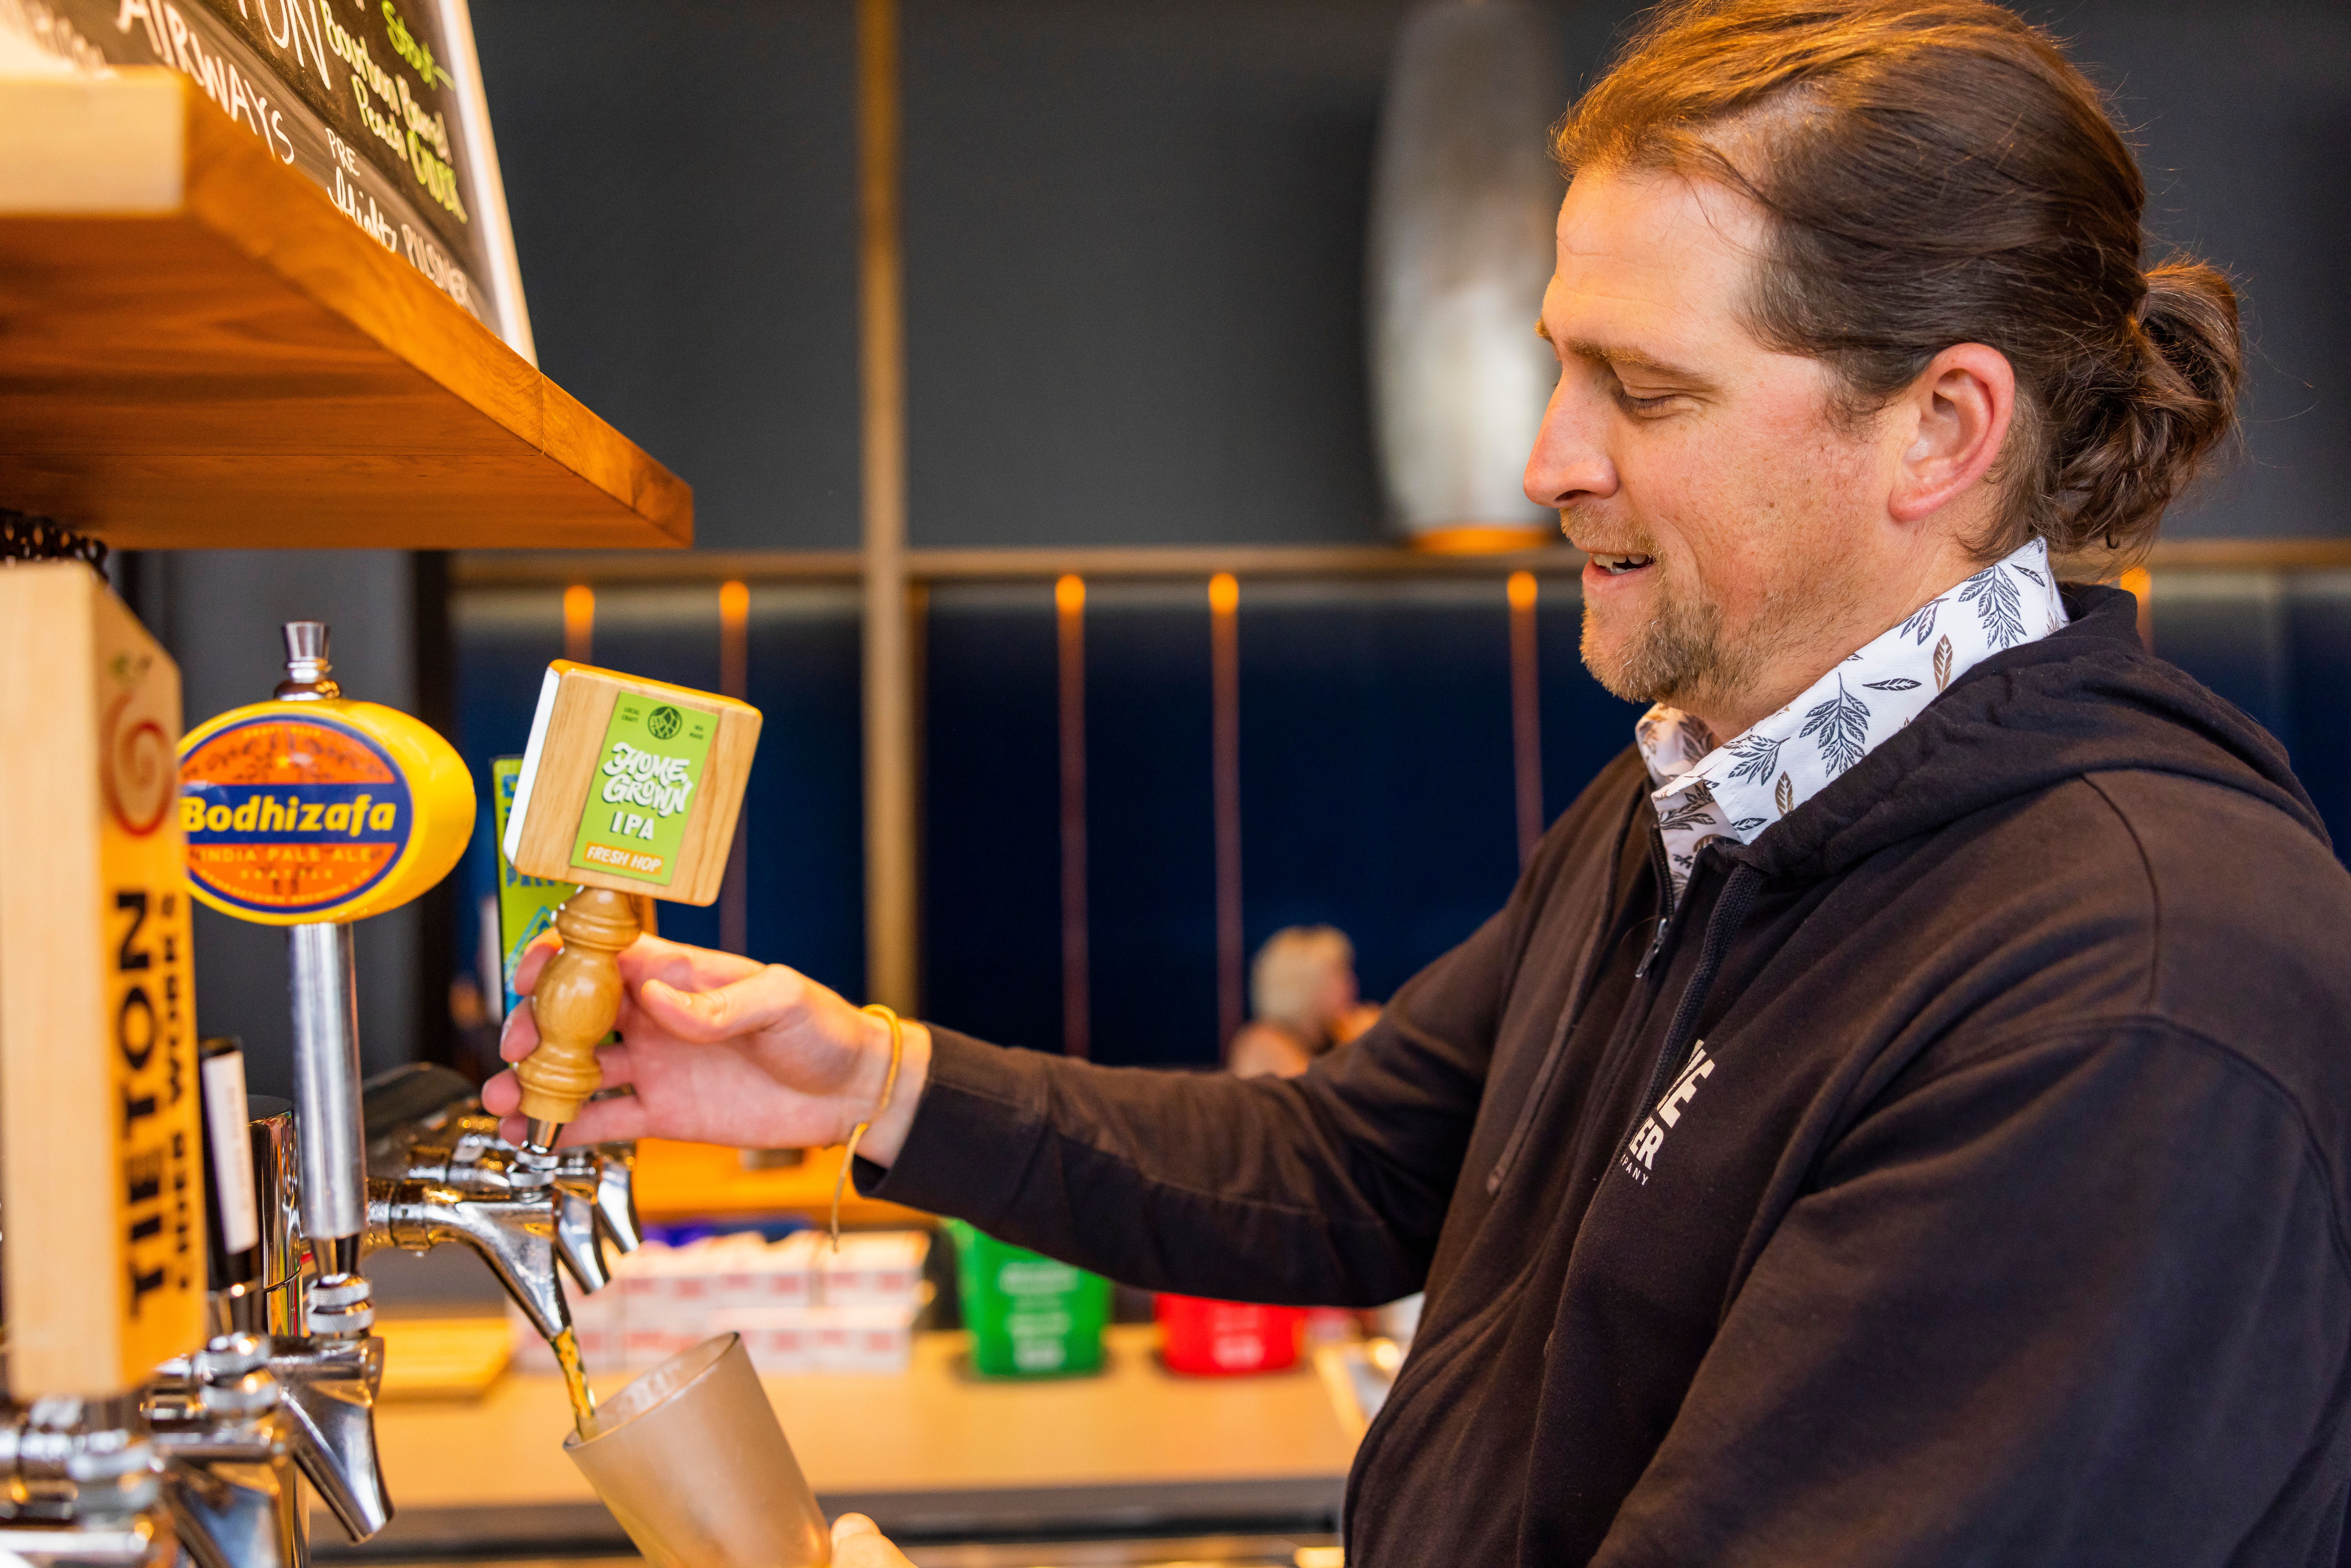 Draft beer made from hops served at Alaska Airlines airport lounges 